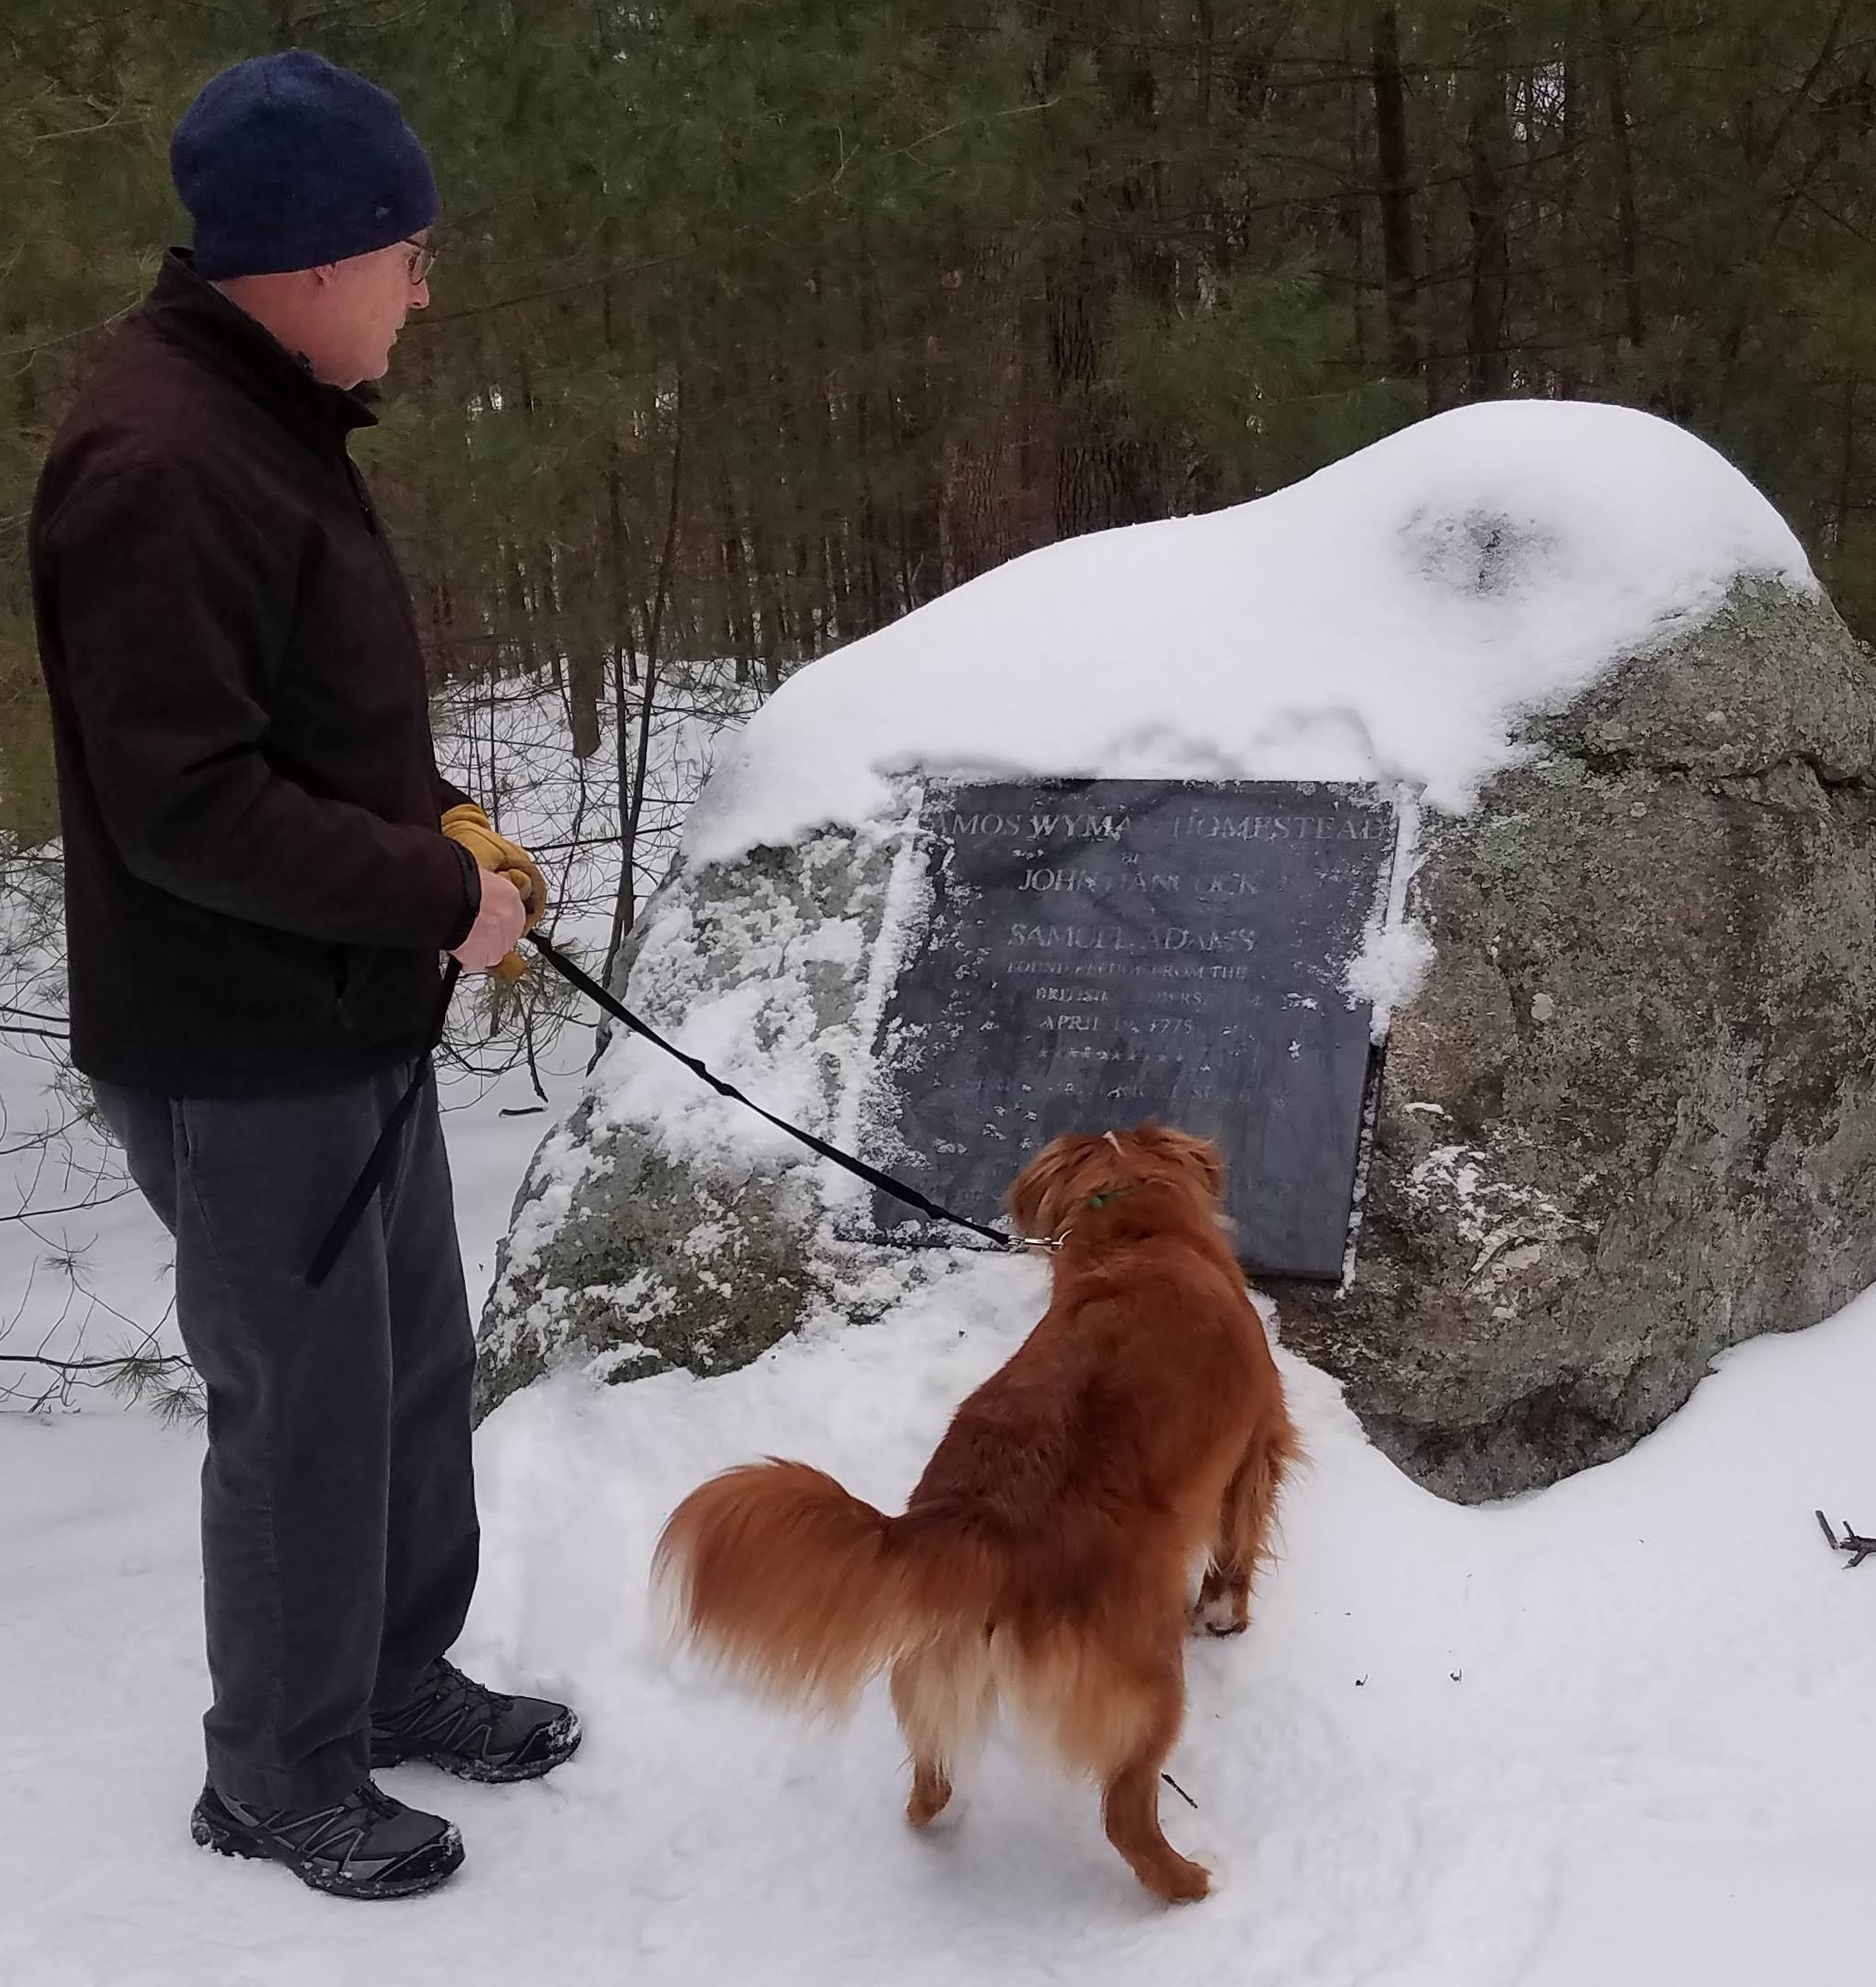 In Billerica, Philbrick and his dog come upon a marker for the place where Samuel Adams and John Hancock hid from British soldiers.